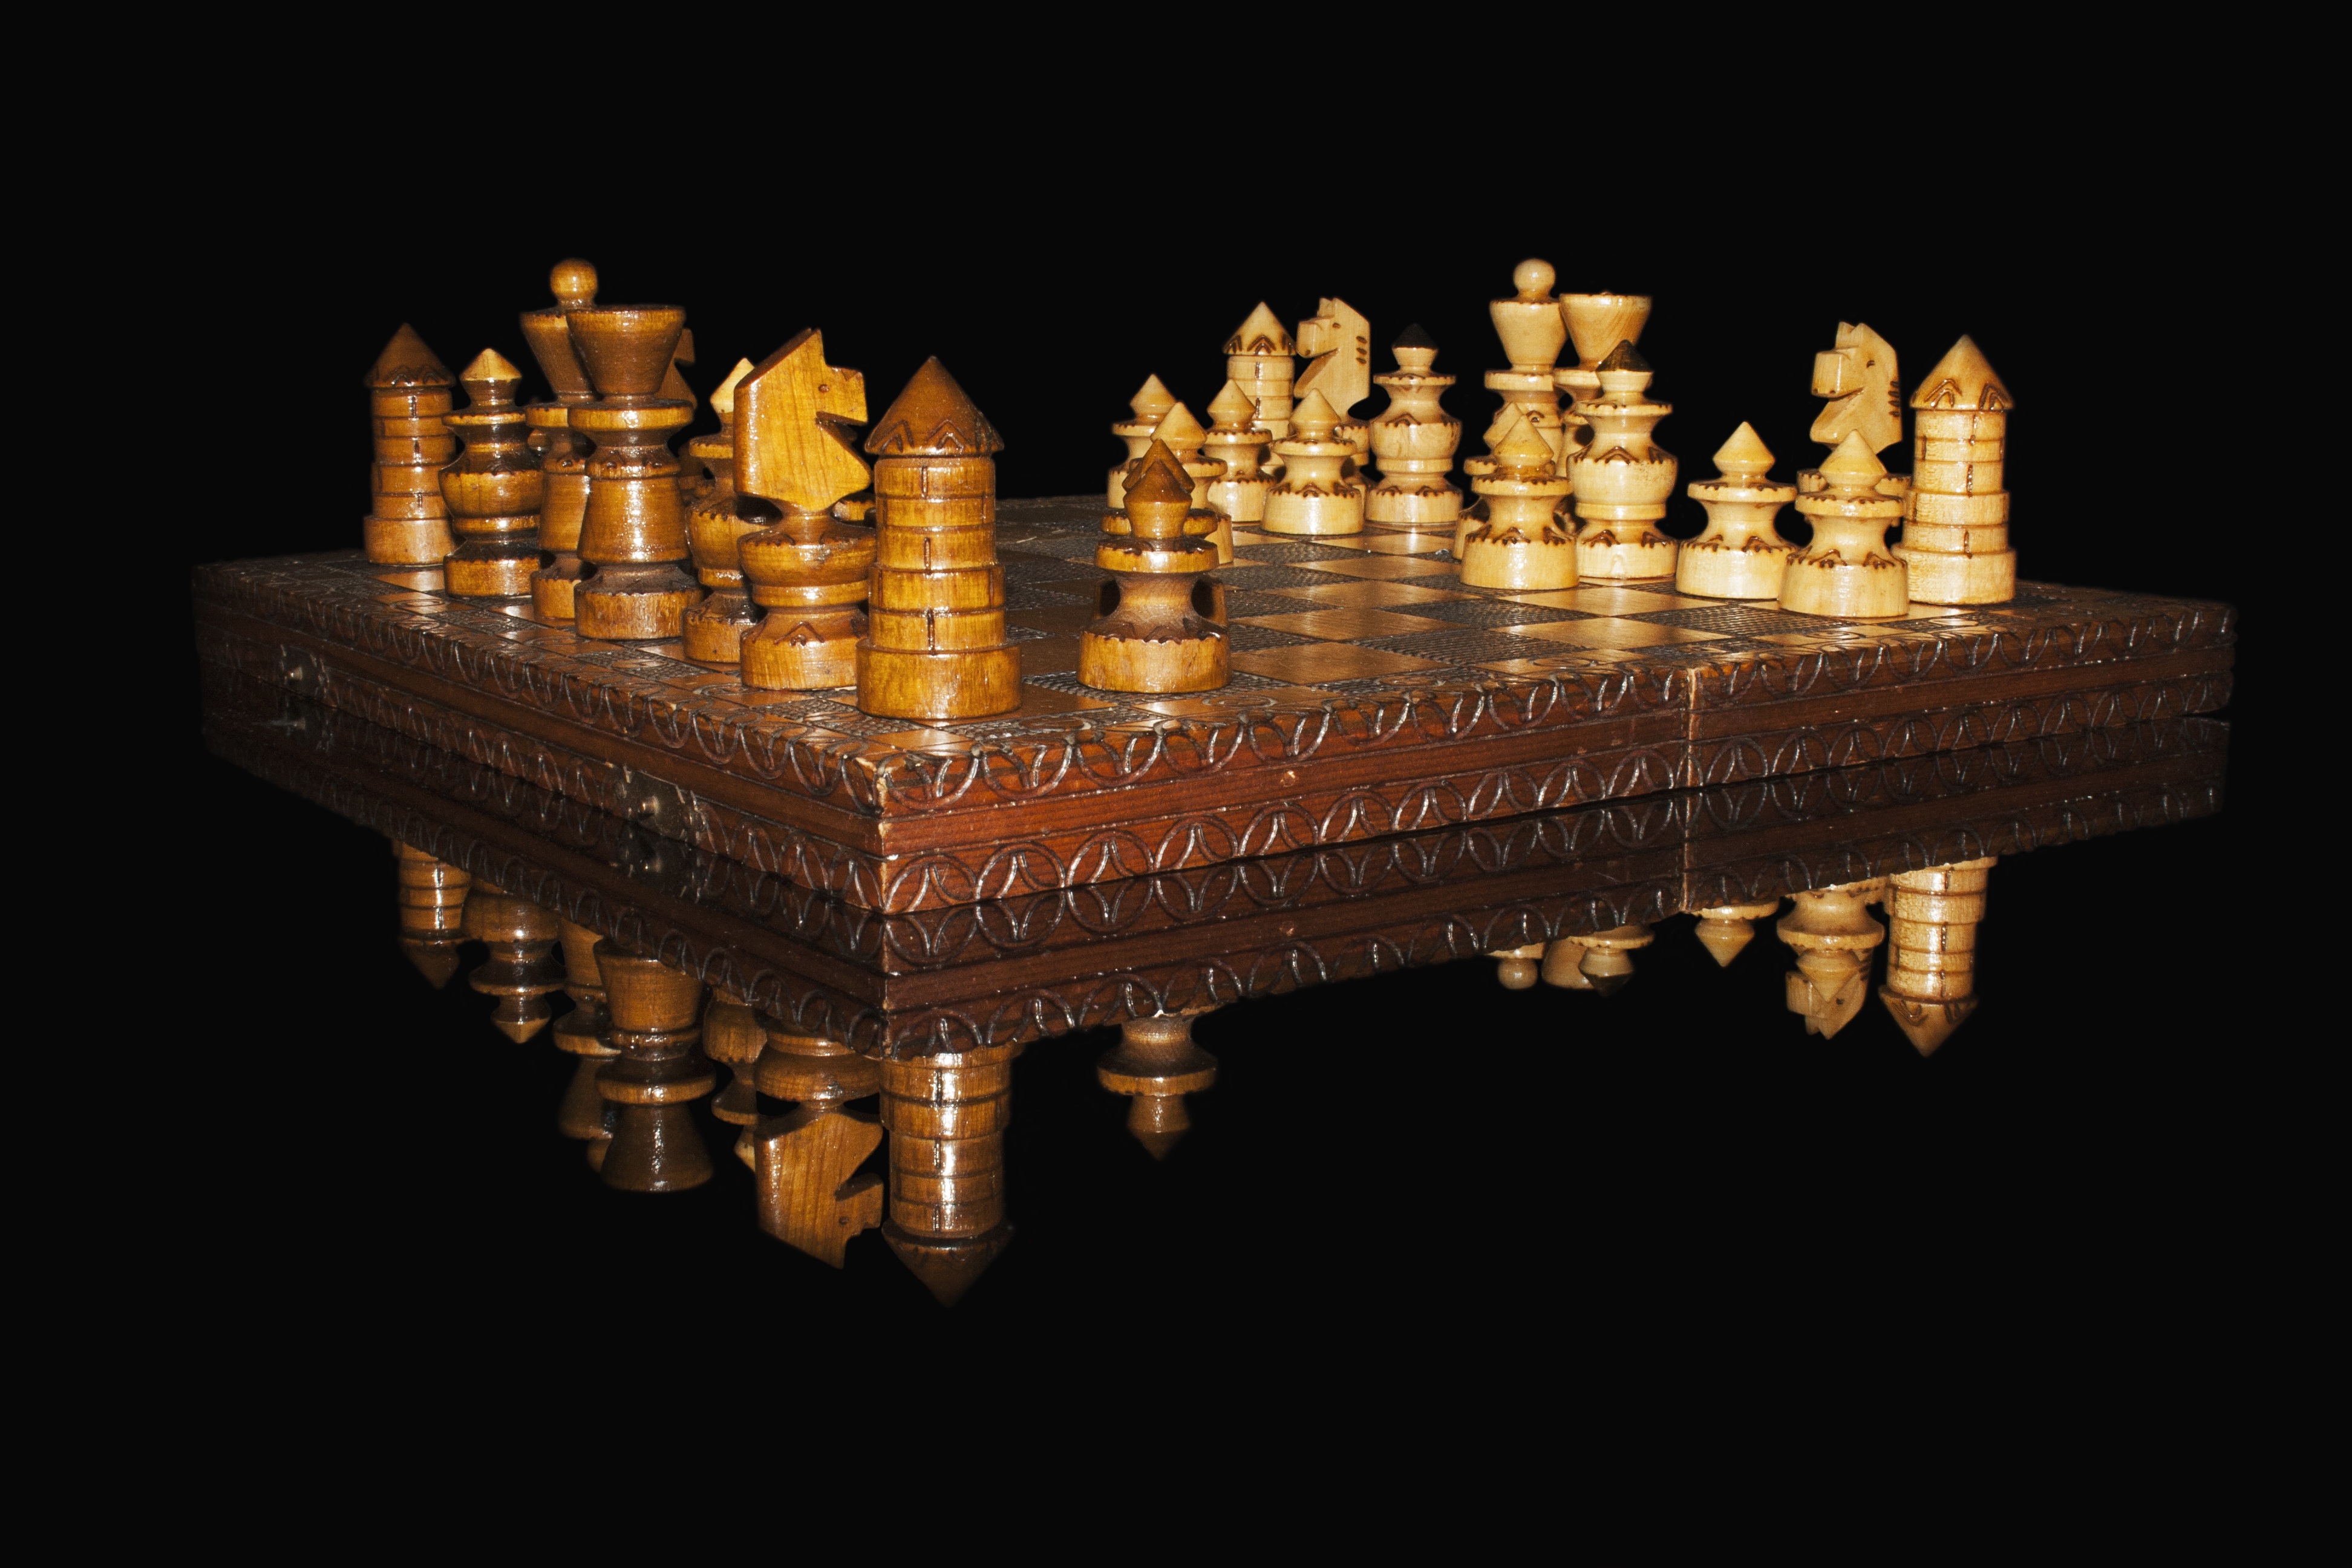 Carved Wooden Chess Set by Waldemar Bajda